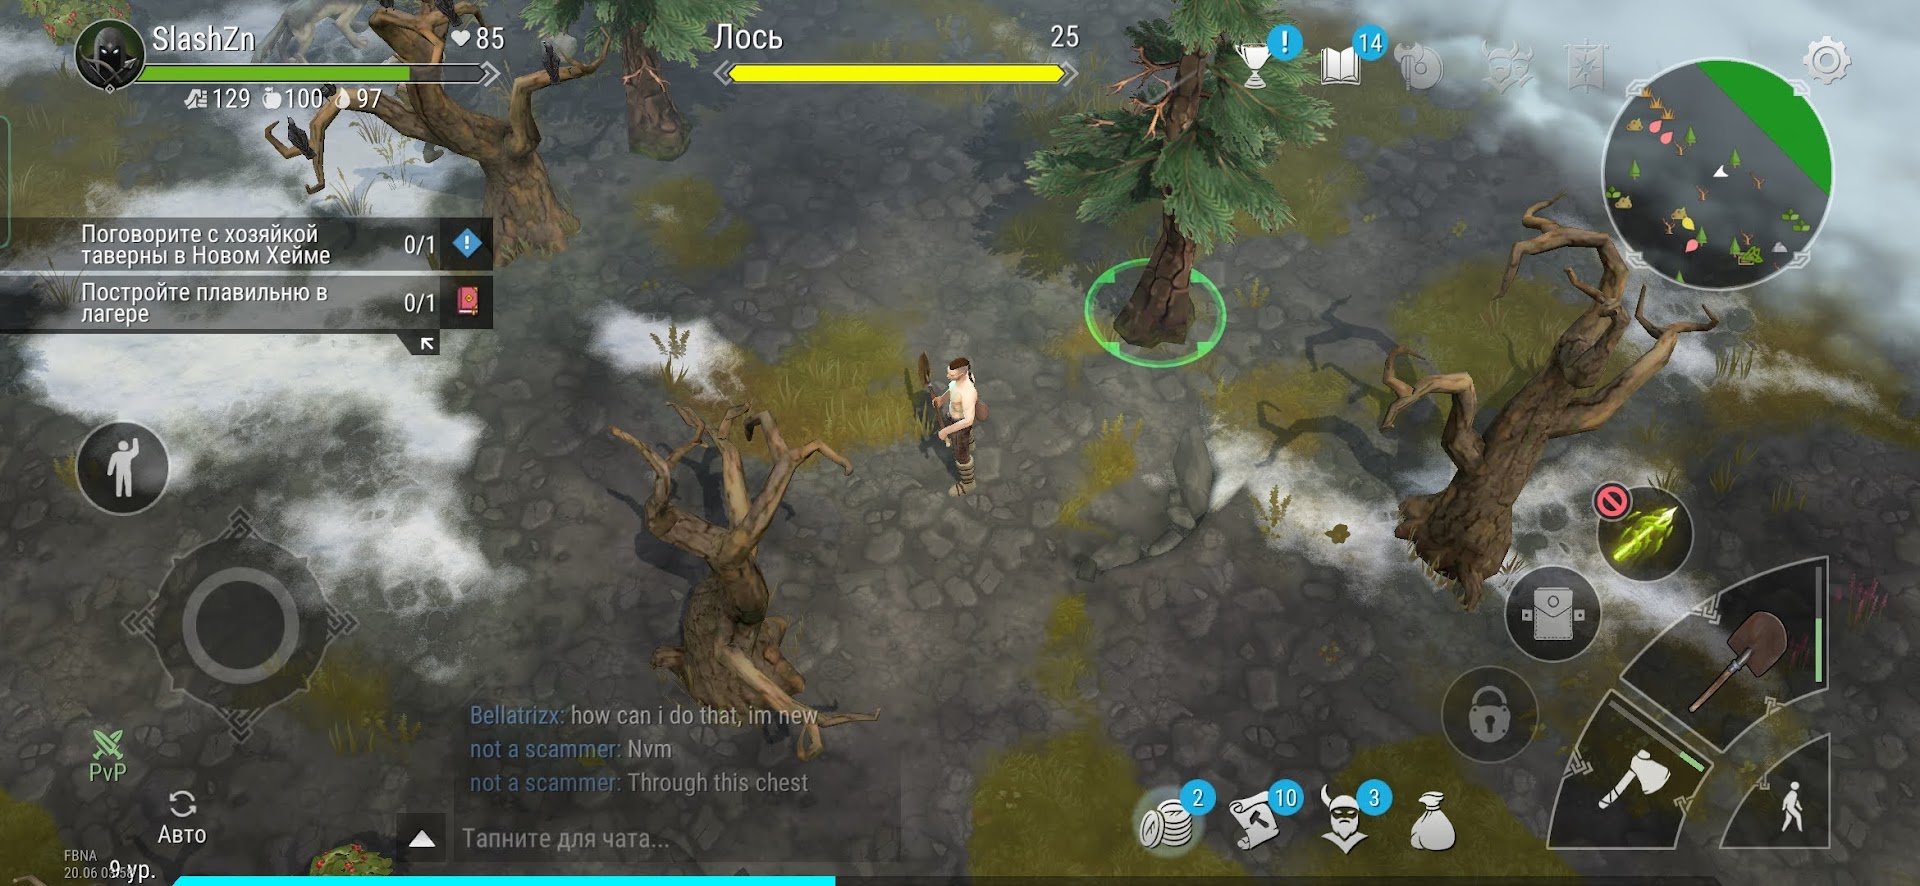 Frostborn: Action RPG